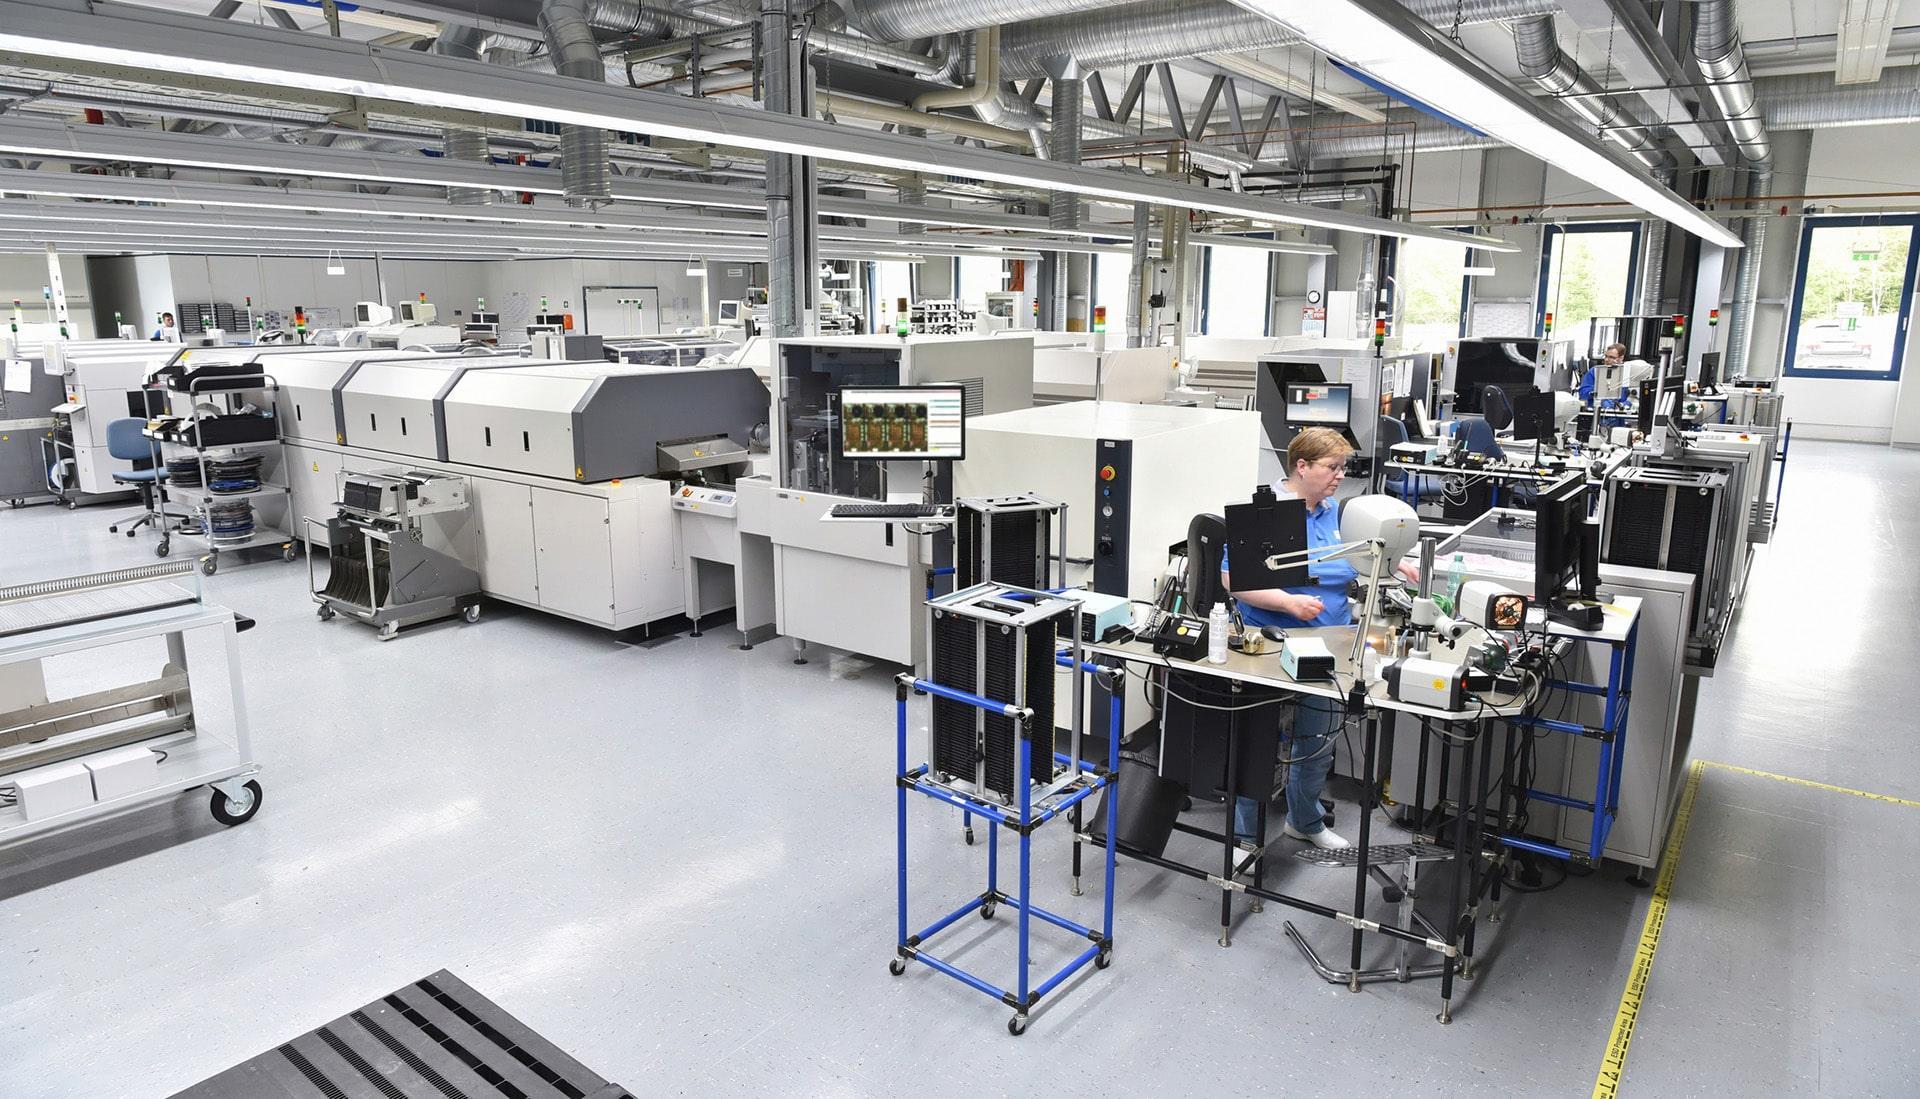 modern industrial factory for the production of electronic components - machinery, interior and equipment of the production hall